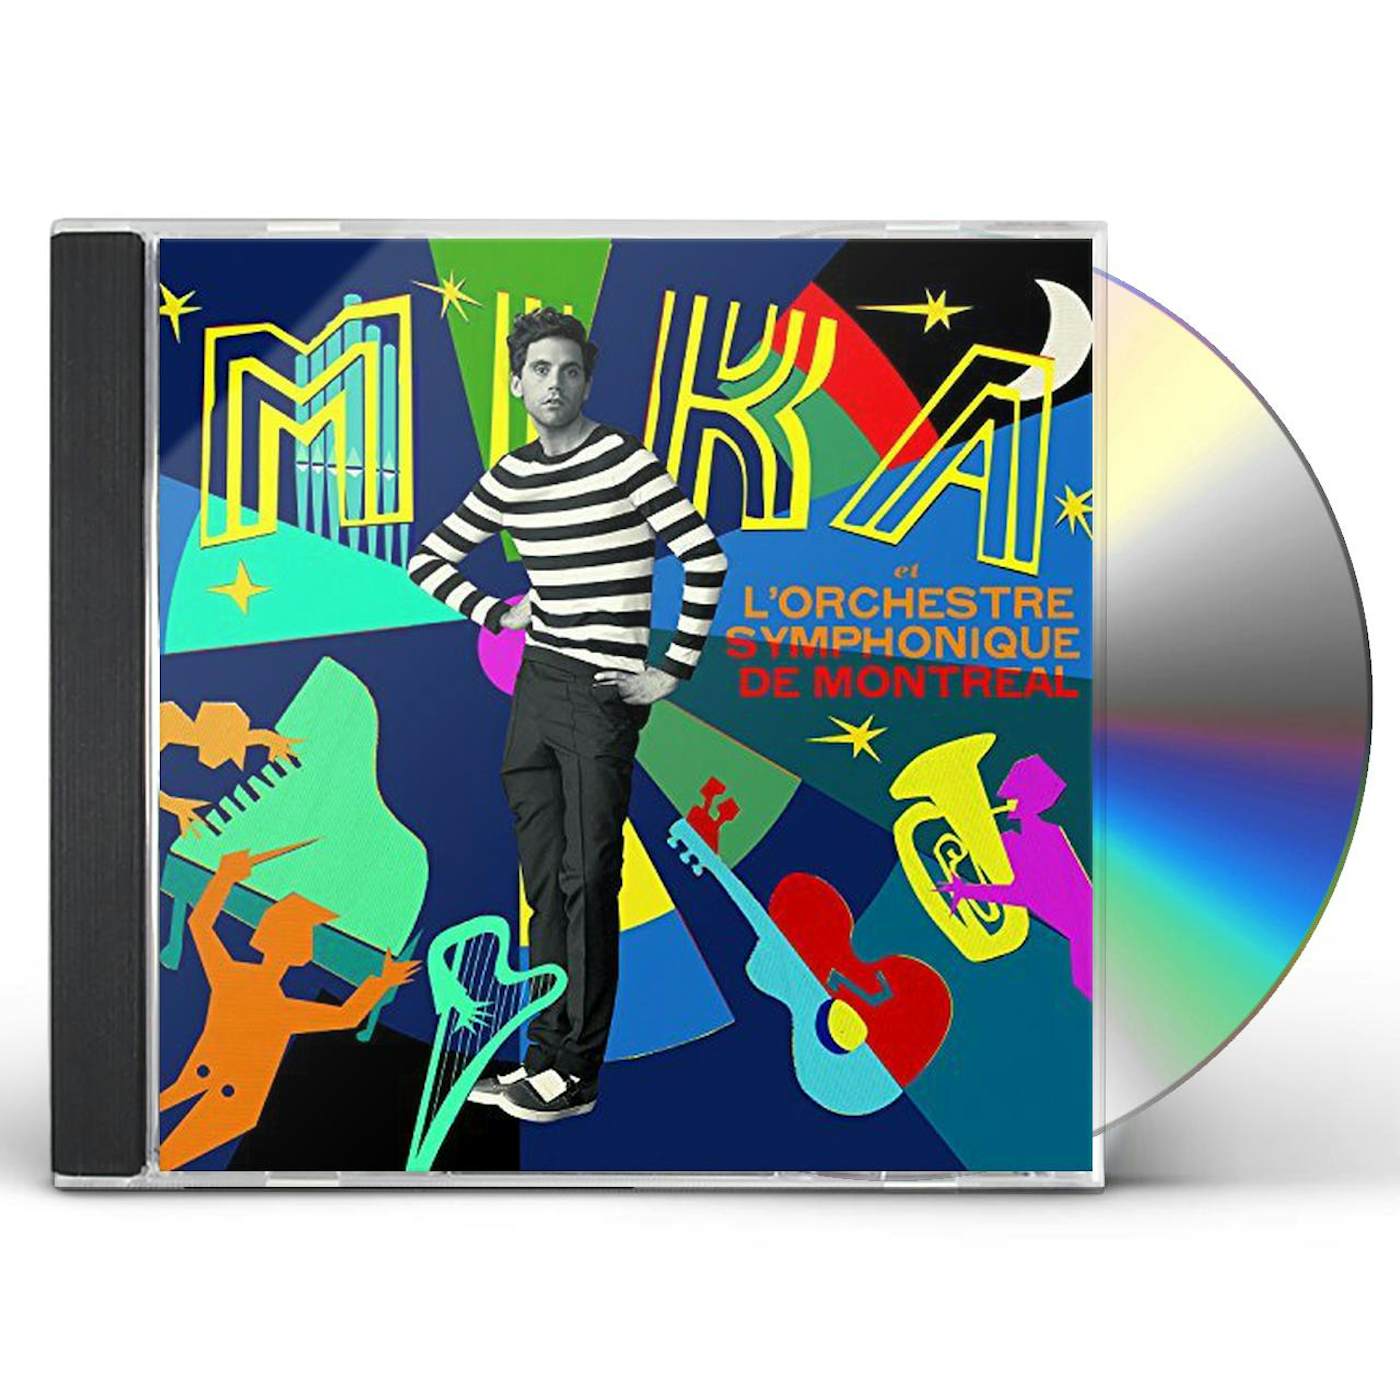 Mika - The Origin of Love by Mika - CD - Signed Booklet by Mika